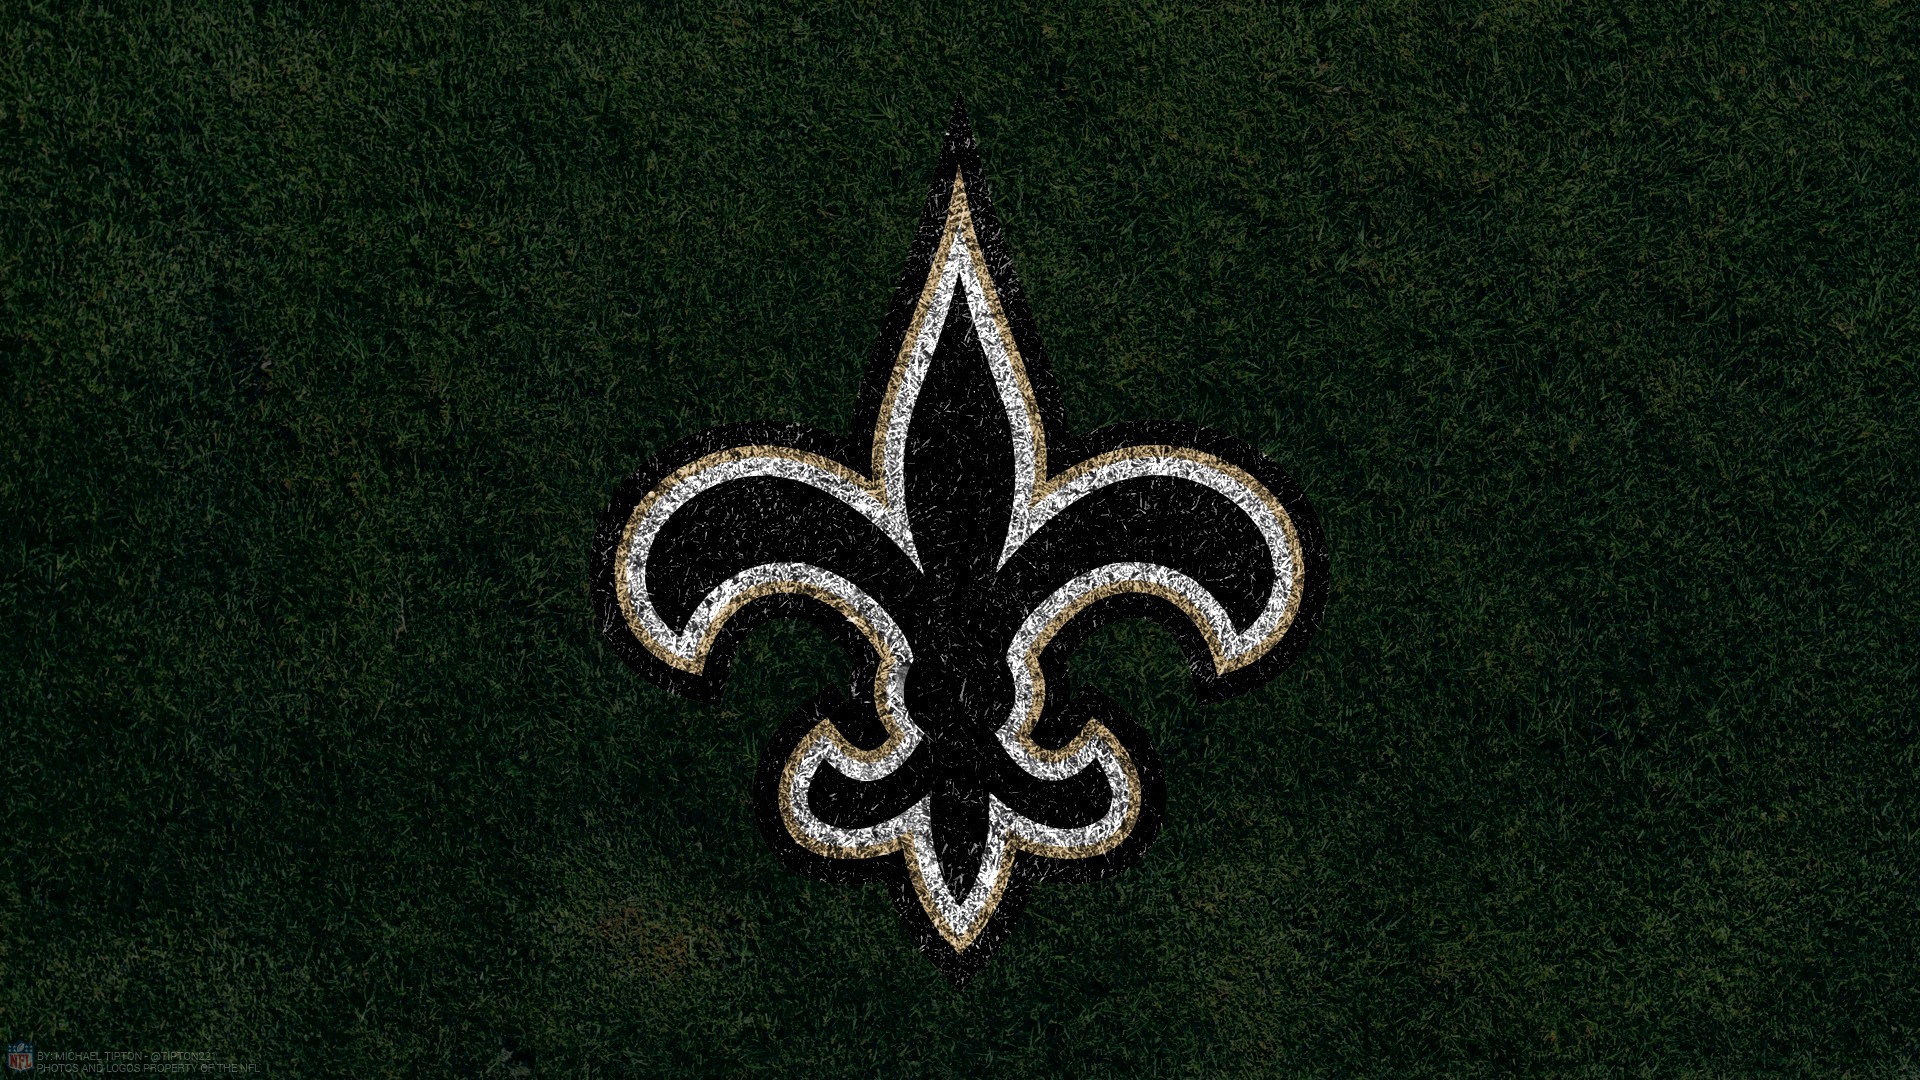 New Orleans Saints HD Wallpapers With Resolution 1920X1080 pixel. You can make this wallpaper for your Mac or Windows Desktop Background, iPhone, Android or Tablet and another Smartphone device for free